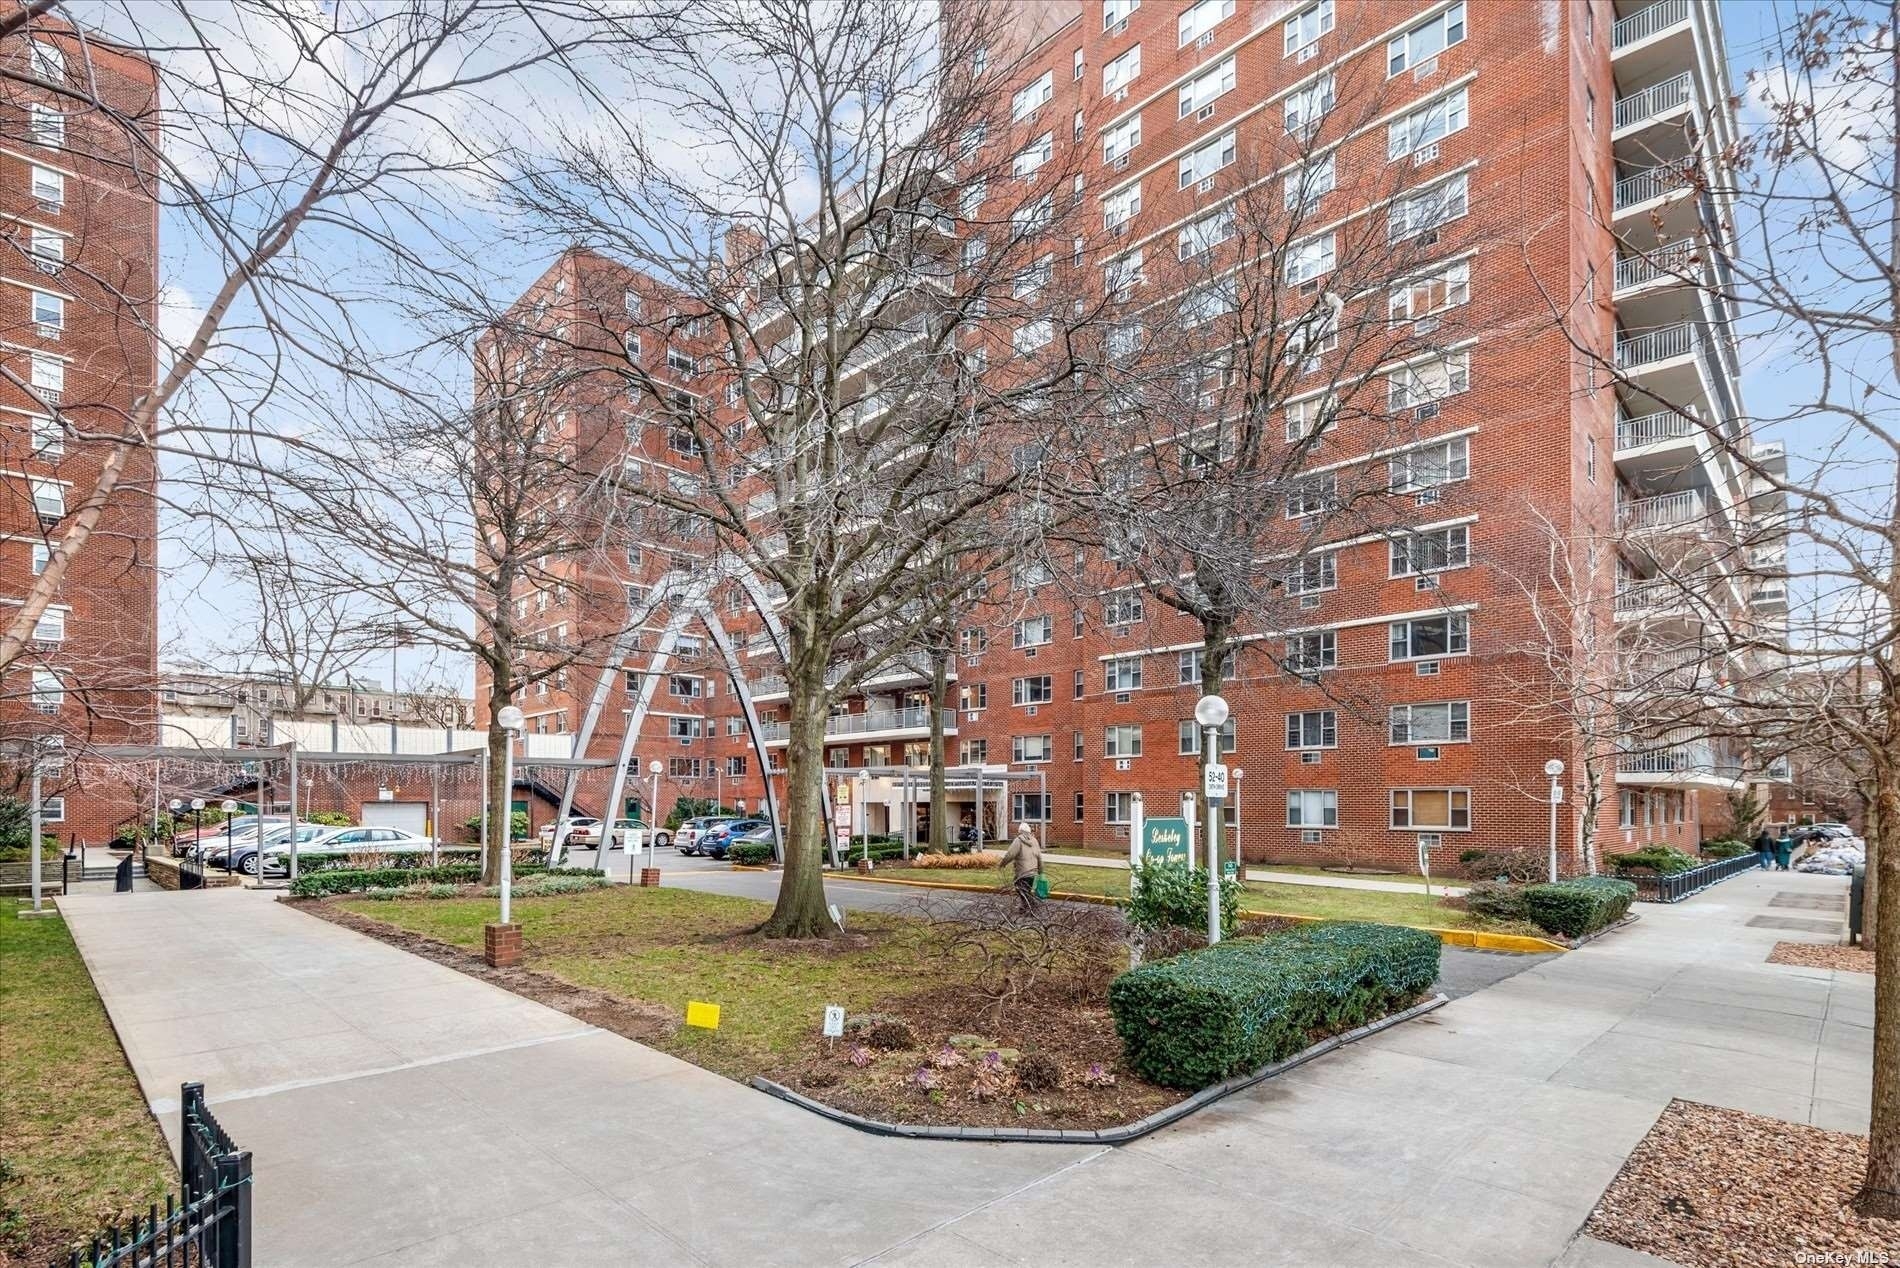 Property at 52-30 39th Drive, 5V Woodside, Queens, NY 11377